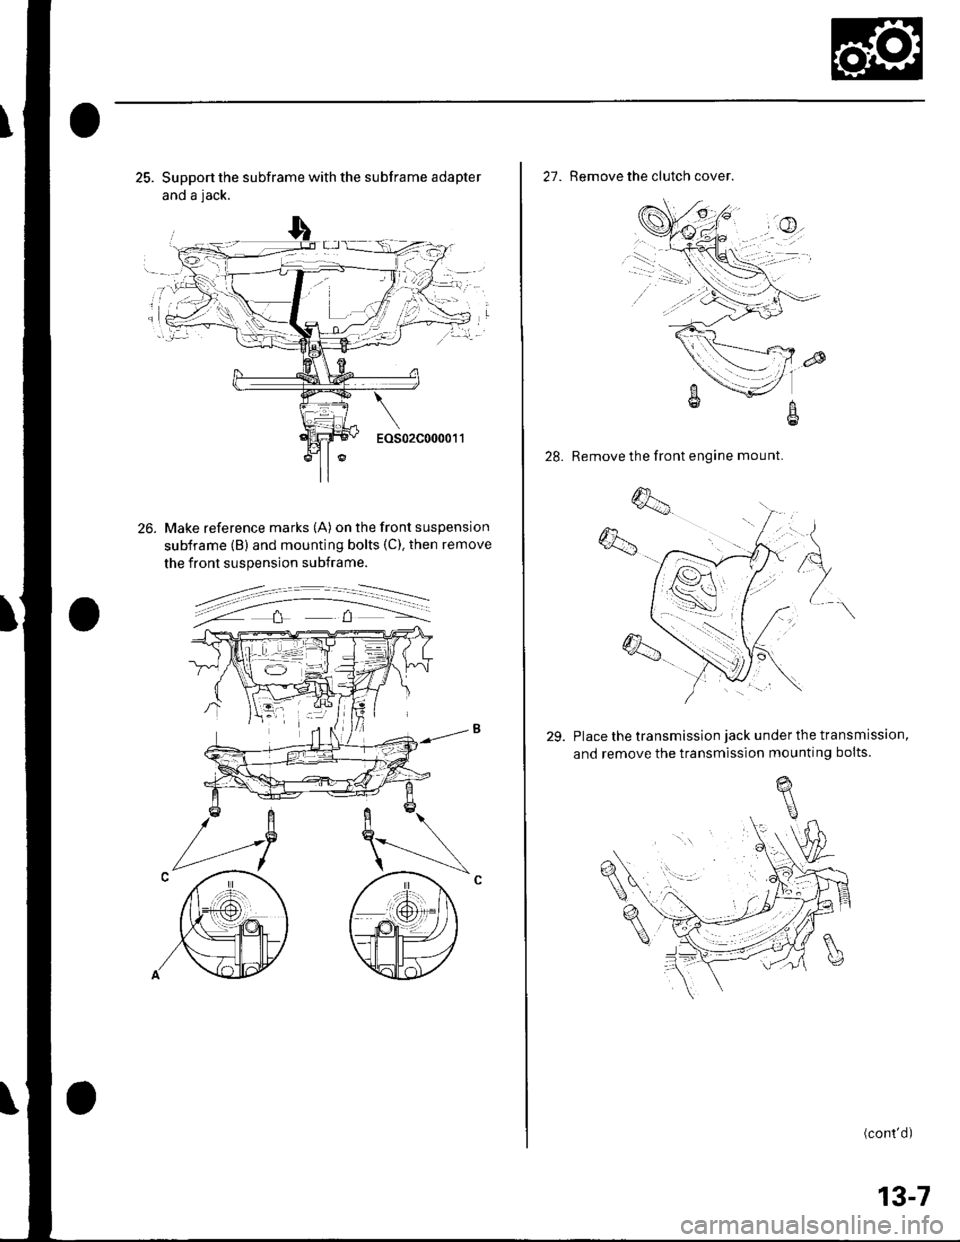 HONDA CIVIC 2003 7.G Owners Guide 25. Support the subframe with the subframe adapter
and a jack.
---
26.
EOS02C000011
Make reference marks (A) on the front suspension
subframe (B) and mounting bolts (C). then remove
the front suspensi